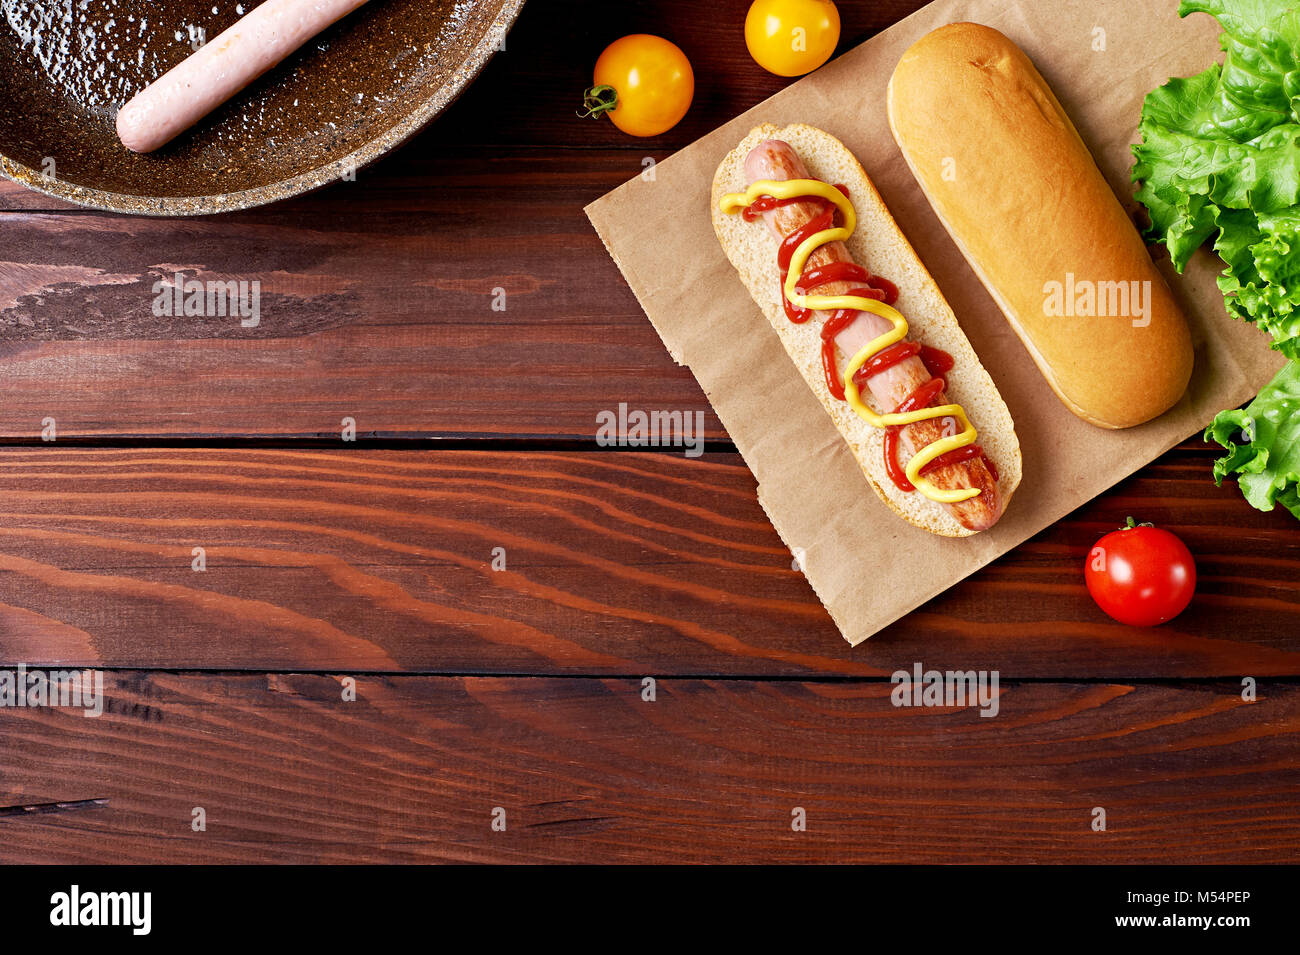 Hot Dog on craft paper bag with sausage in pan, bun, tomatoes and salad flat lay on wooden background. Top view. Stock Photo